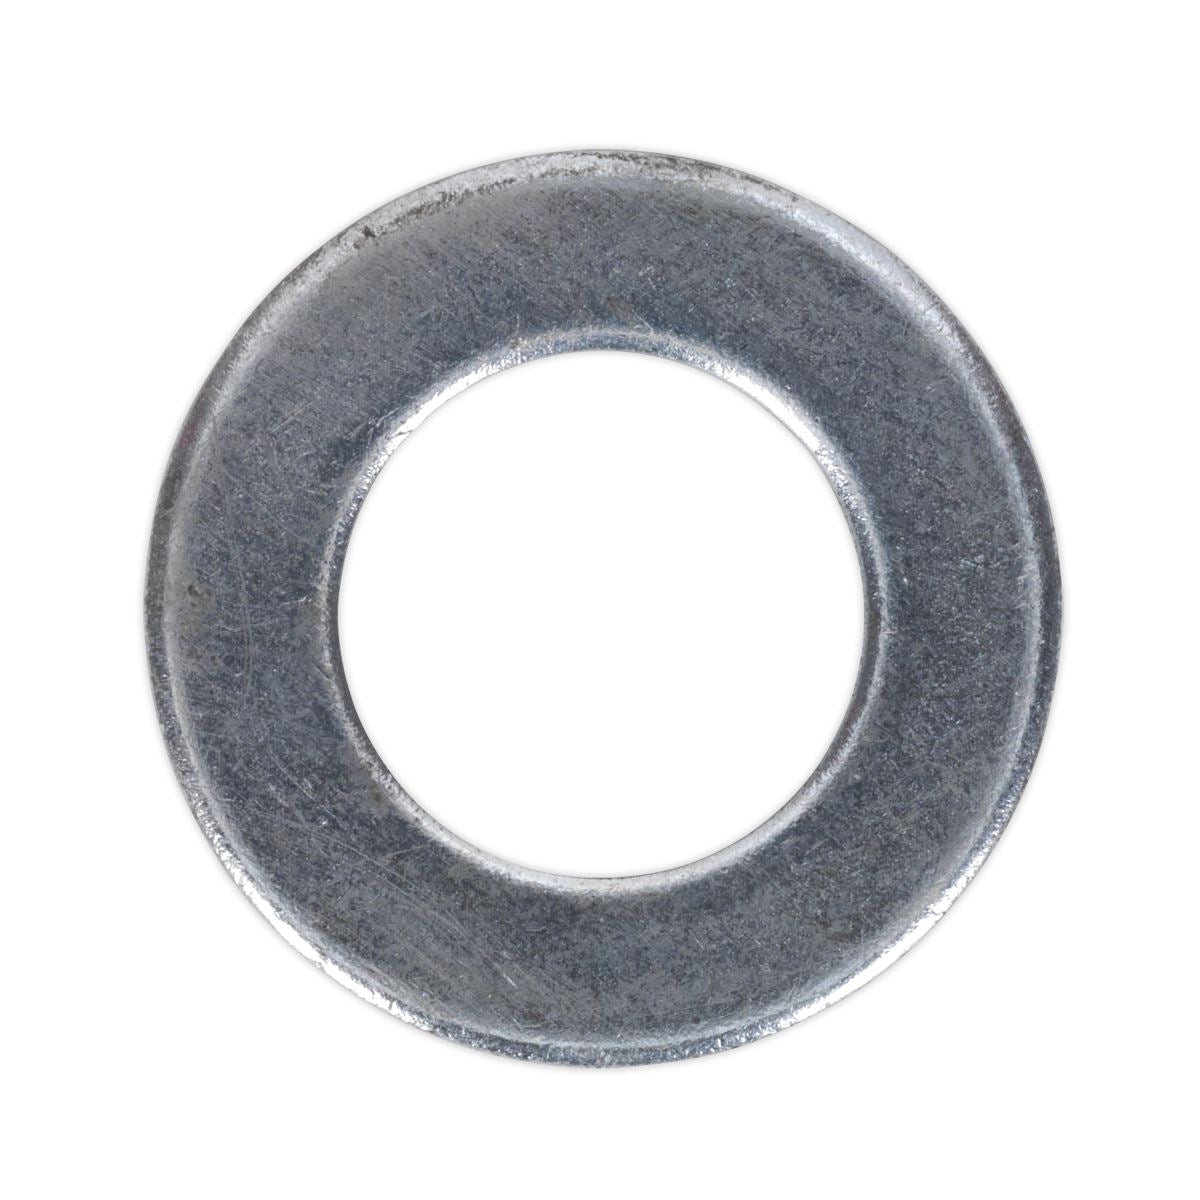 Sealey Flat Washer M24 x 50mm Form C Pack of 25